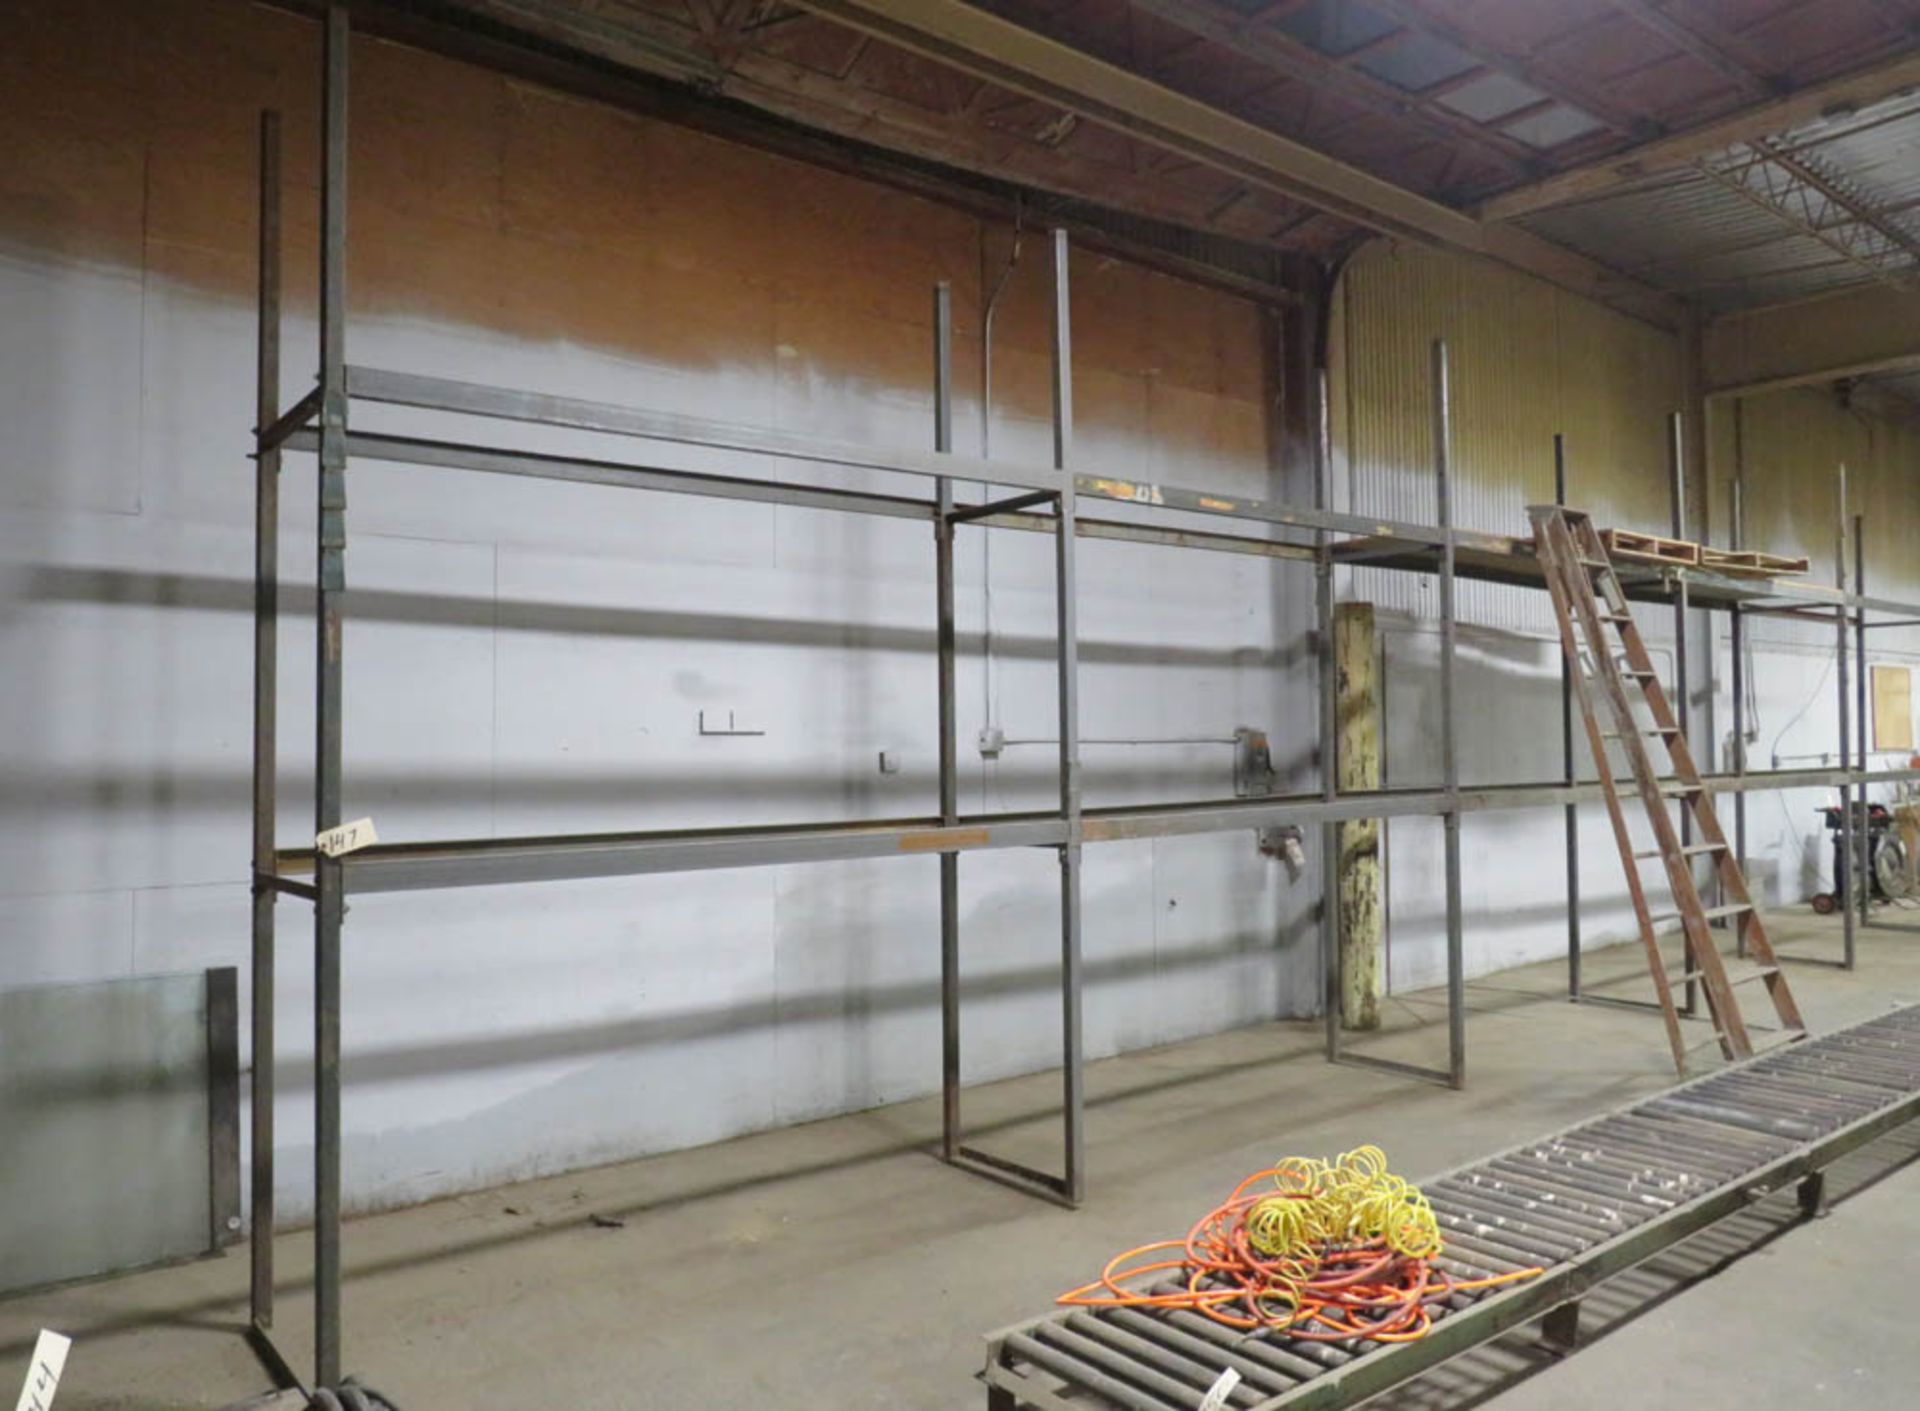 [5] SECTIONS OF PALLET RACKING - 140" X 8" X 30", BOLTED TOGETHER